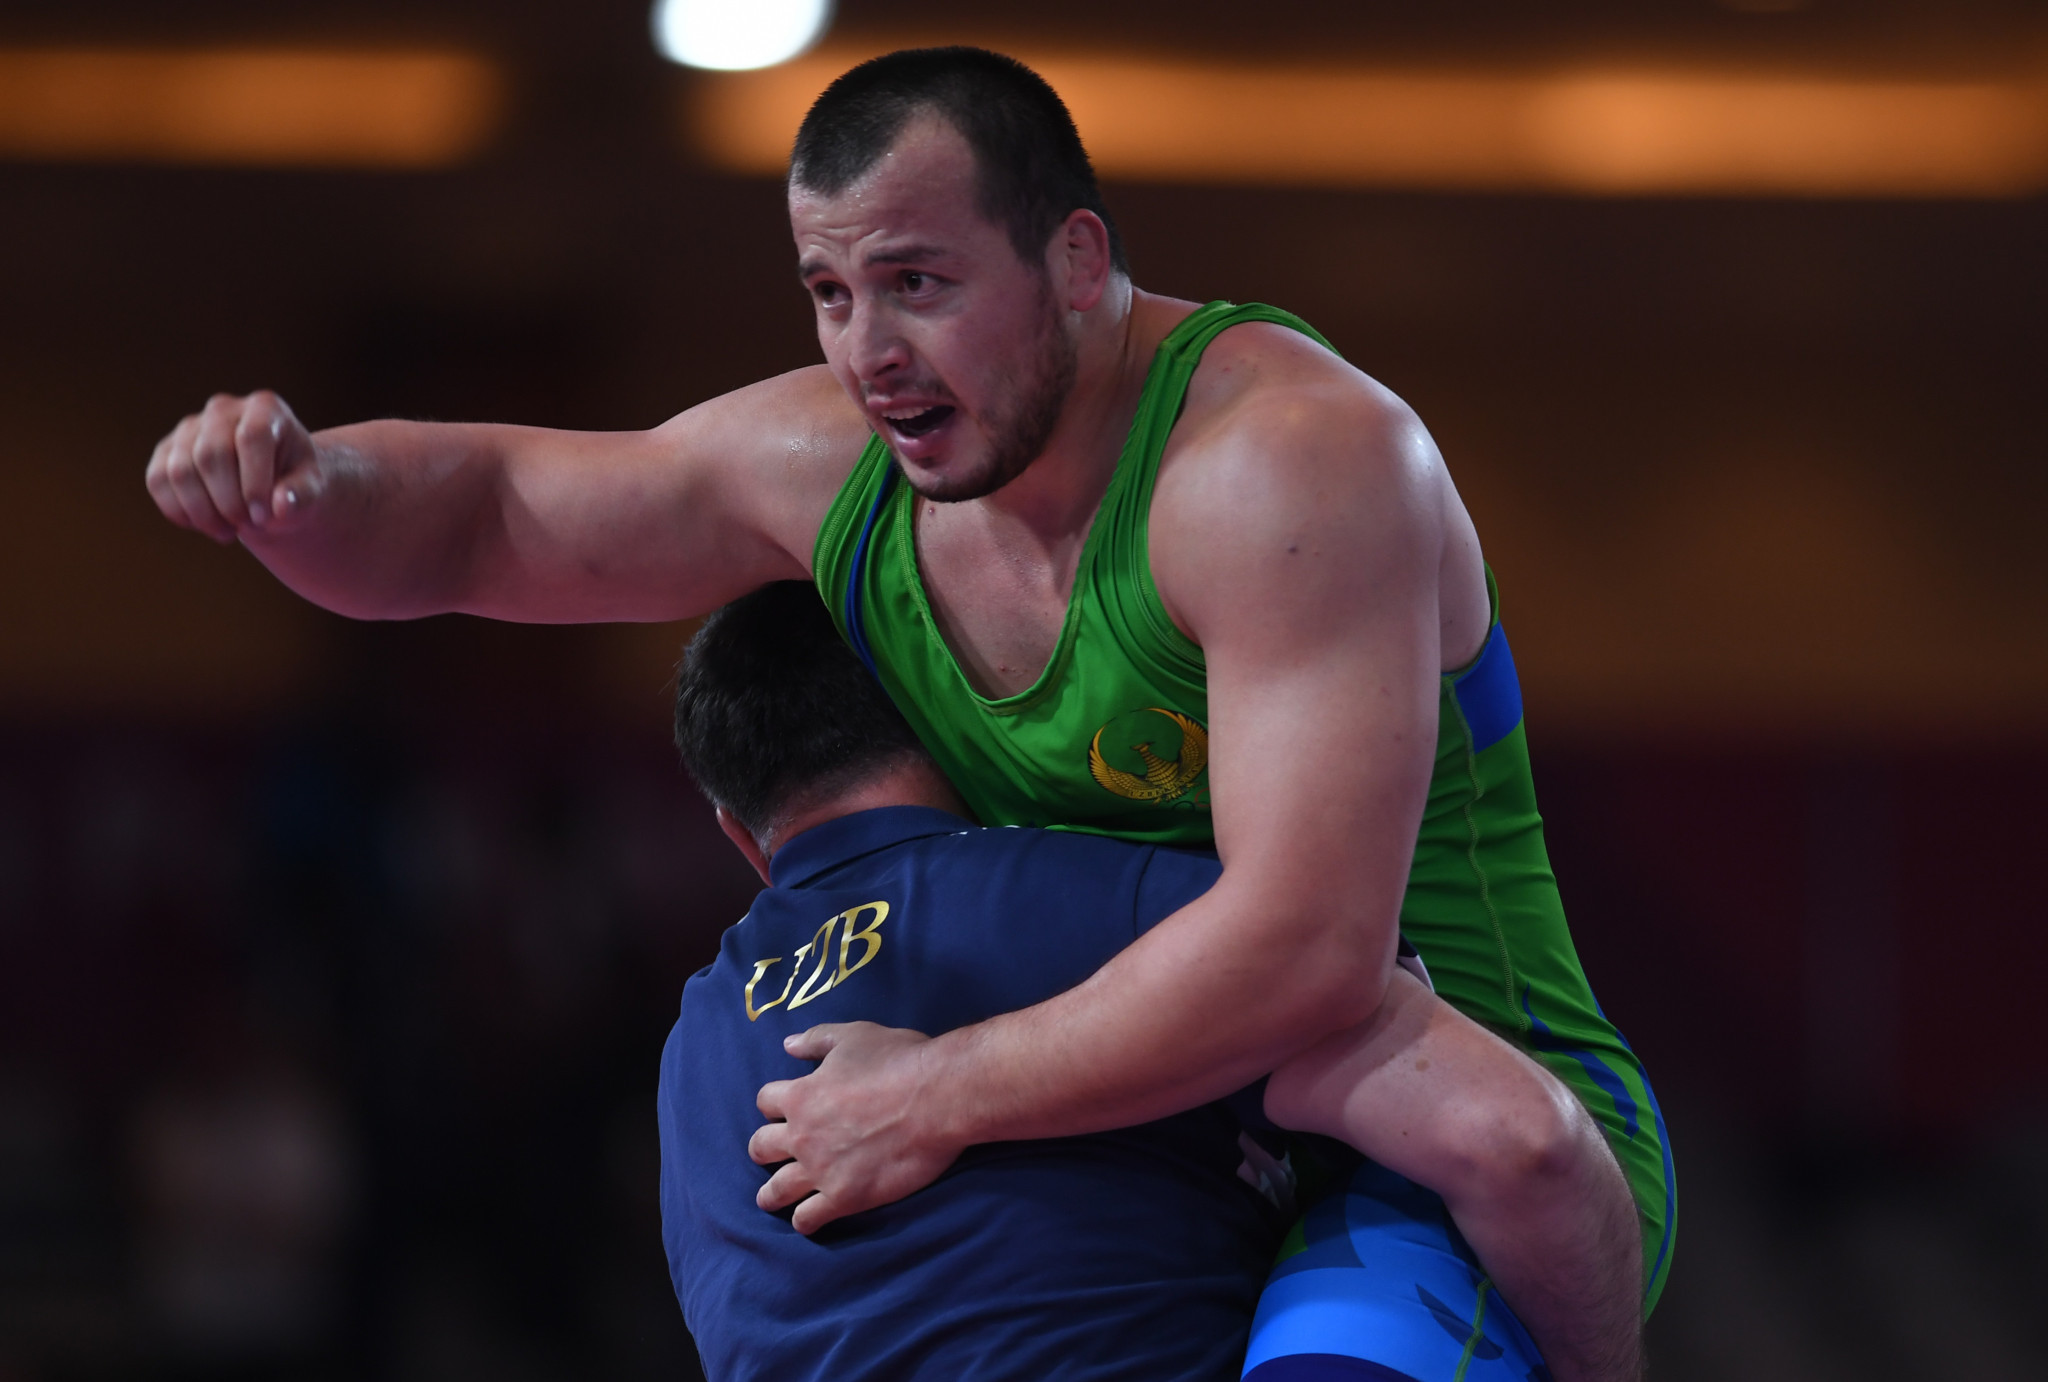 Muminjon Abdullaev secured Olympic qualification in the under-130kg division ©Getty Images